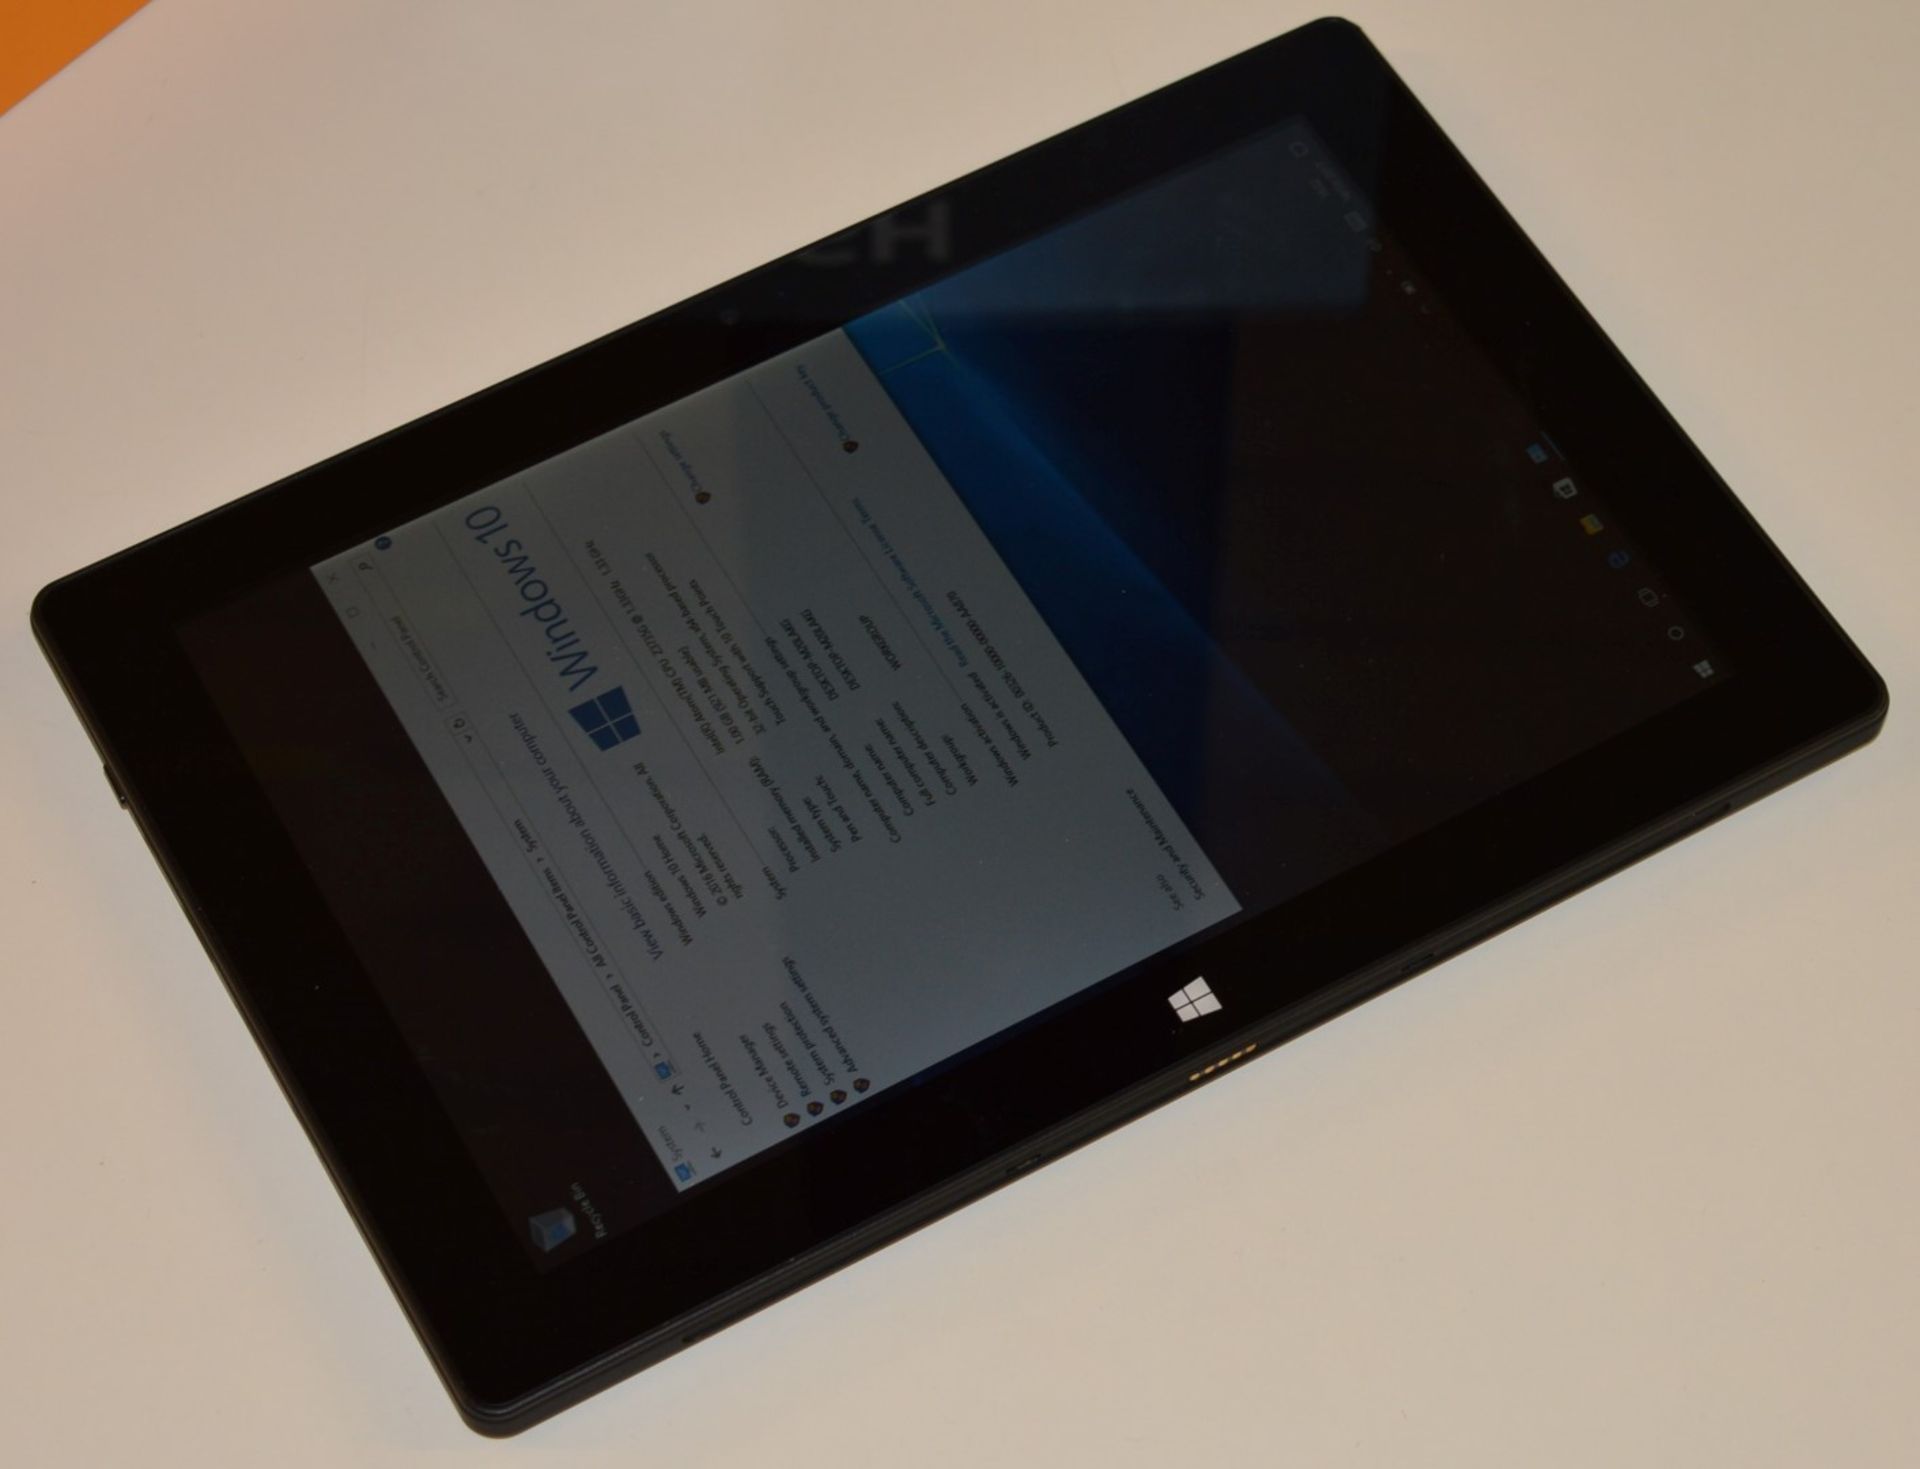 1 x Bush A1 10.1 Inch Windows Tablet - Features Include Intel Atom 1.8ghz Quad Core Processor, 1gb - Image 9 of 11